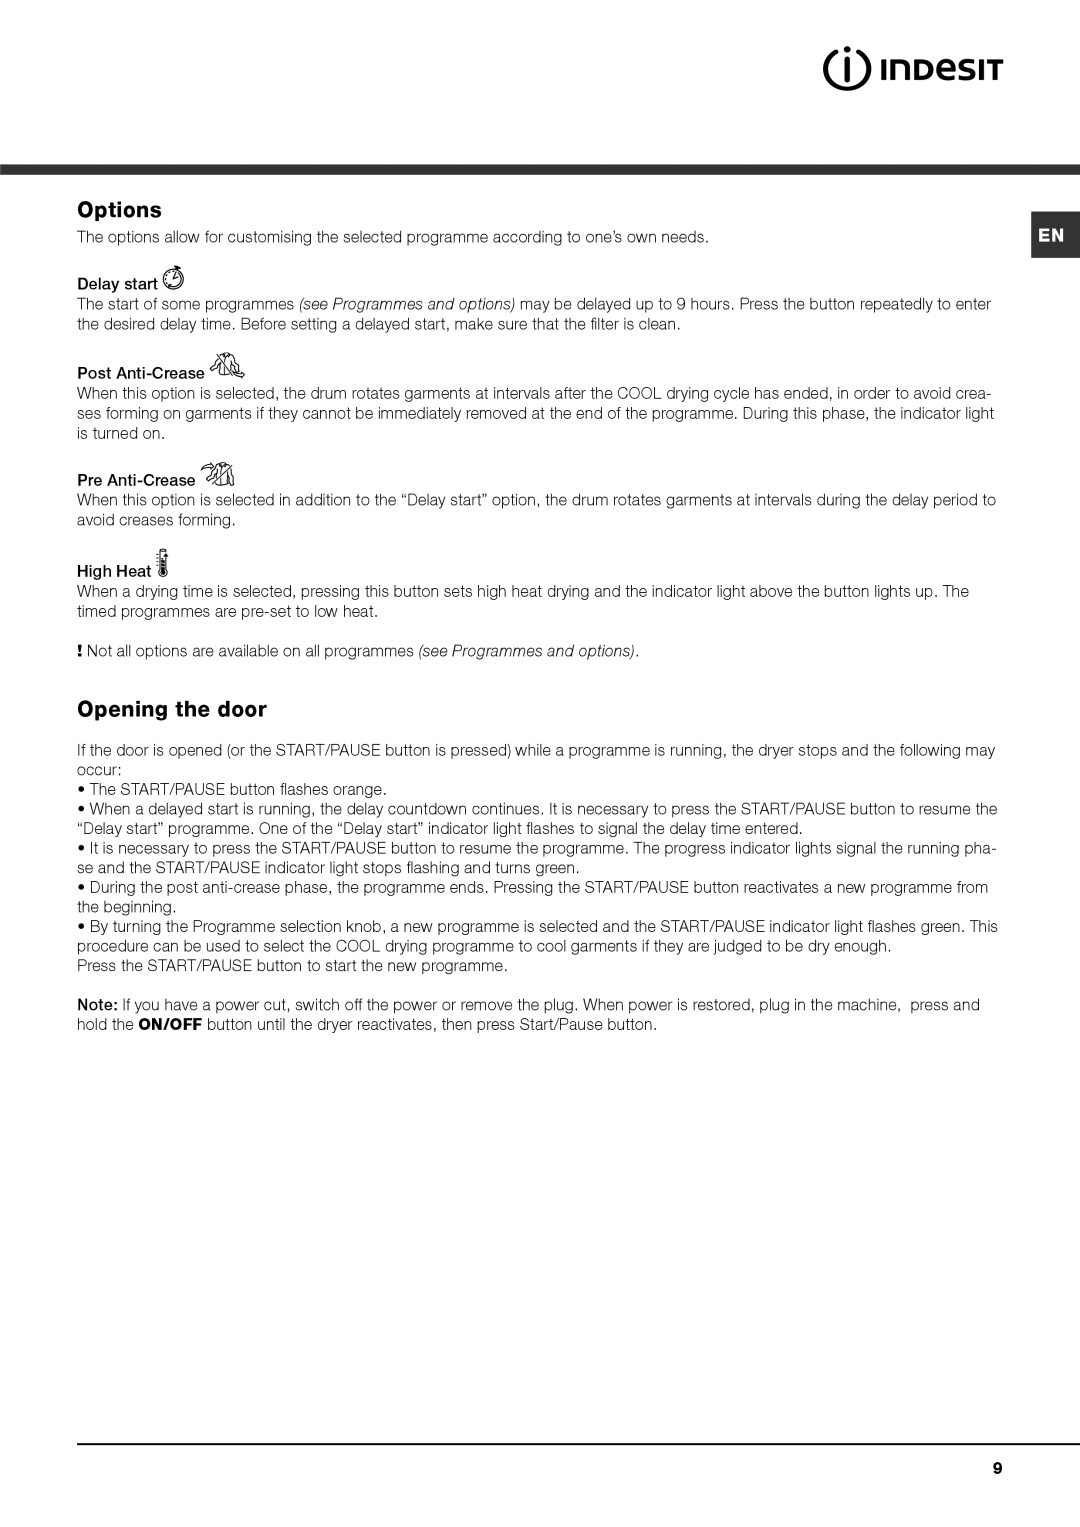 Indesit IDVA 735 S instruction manual Options, Opening the door 